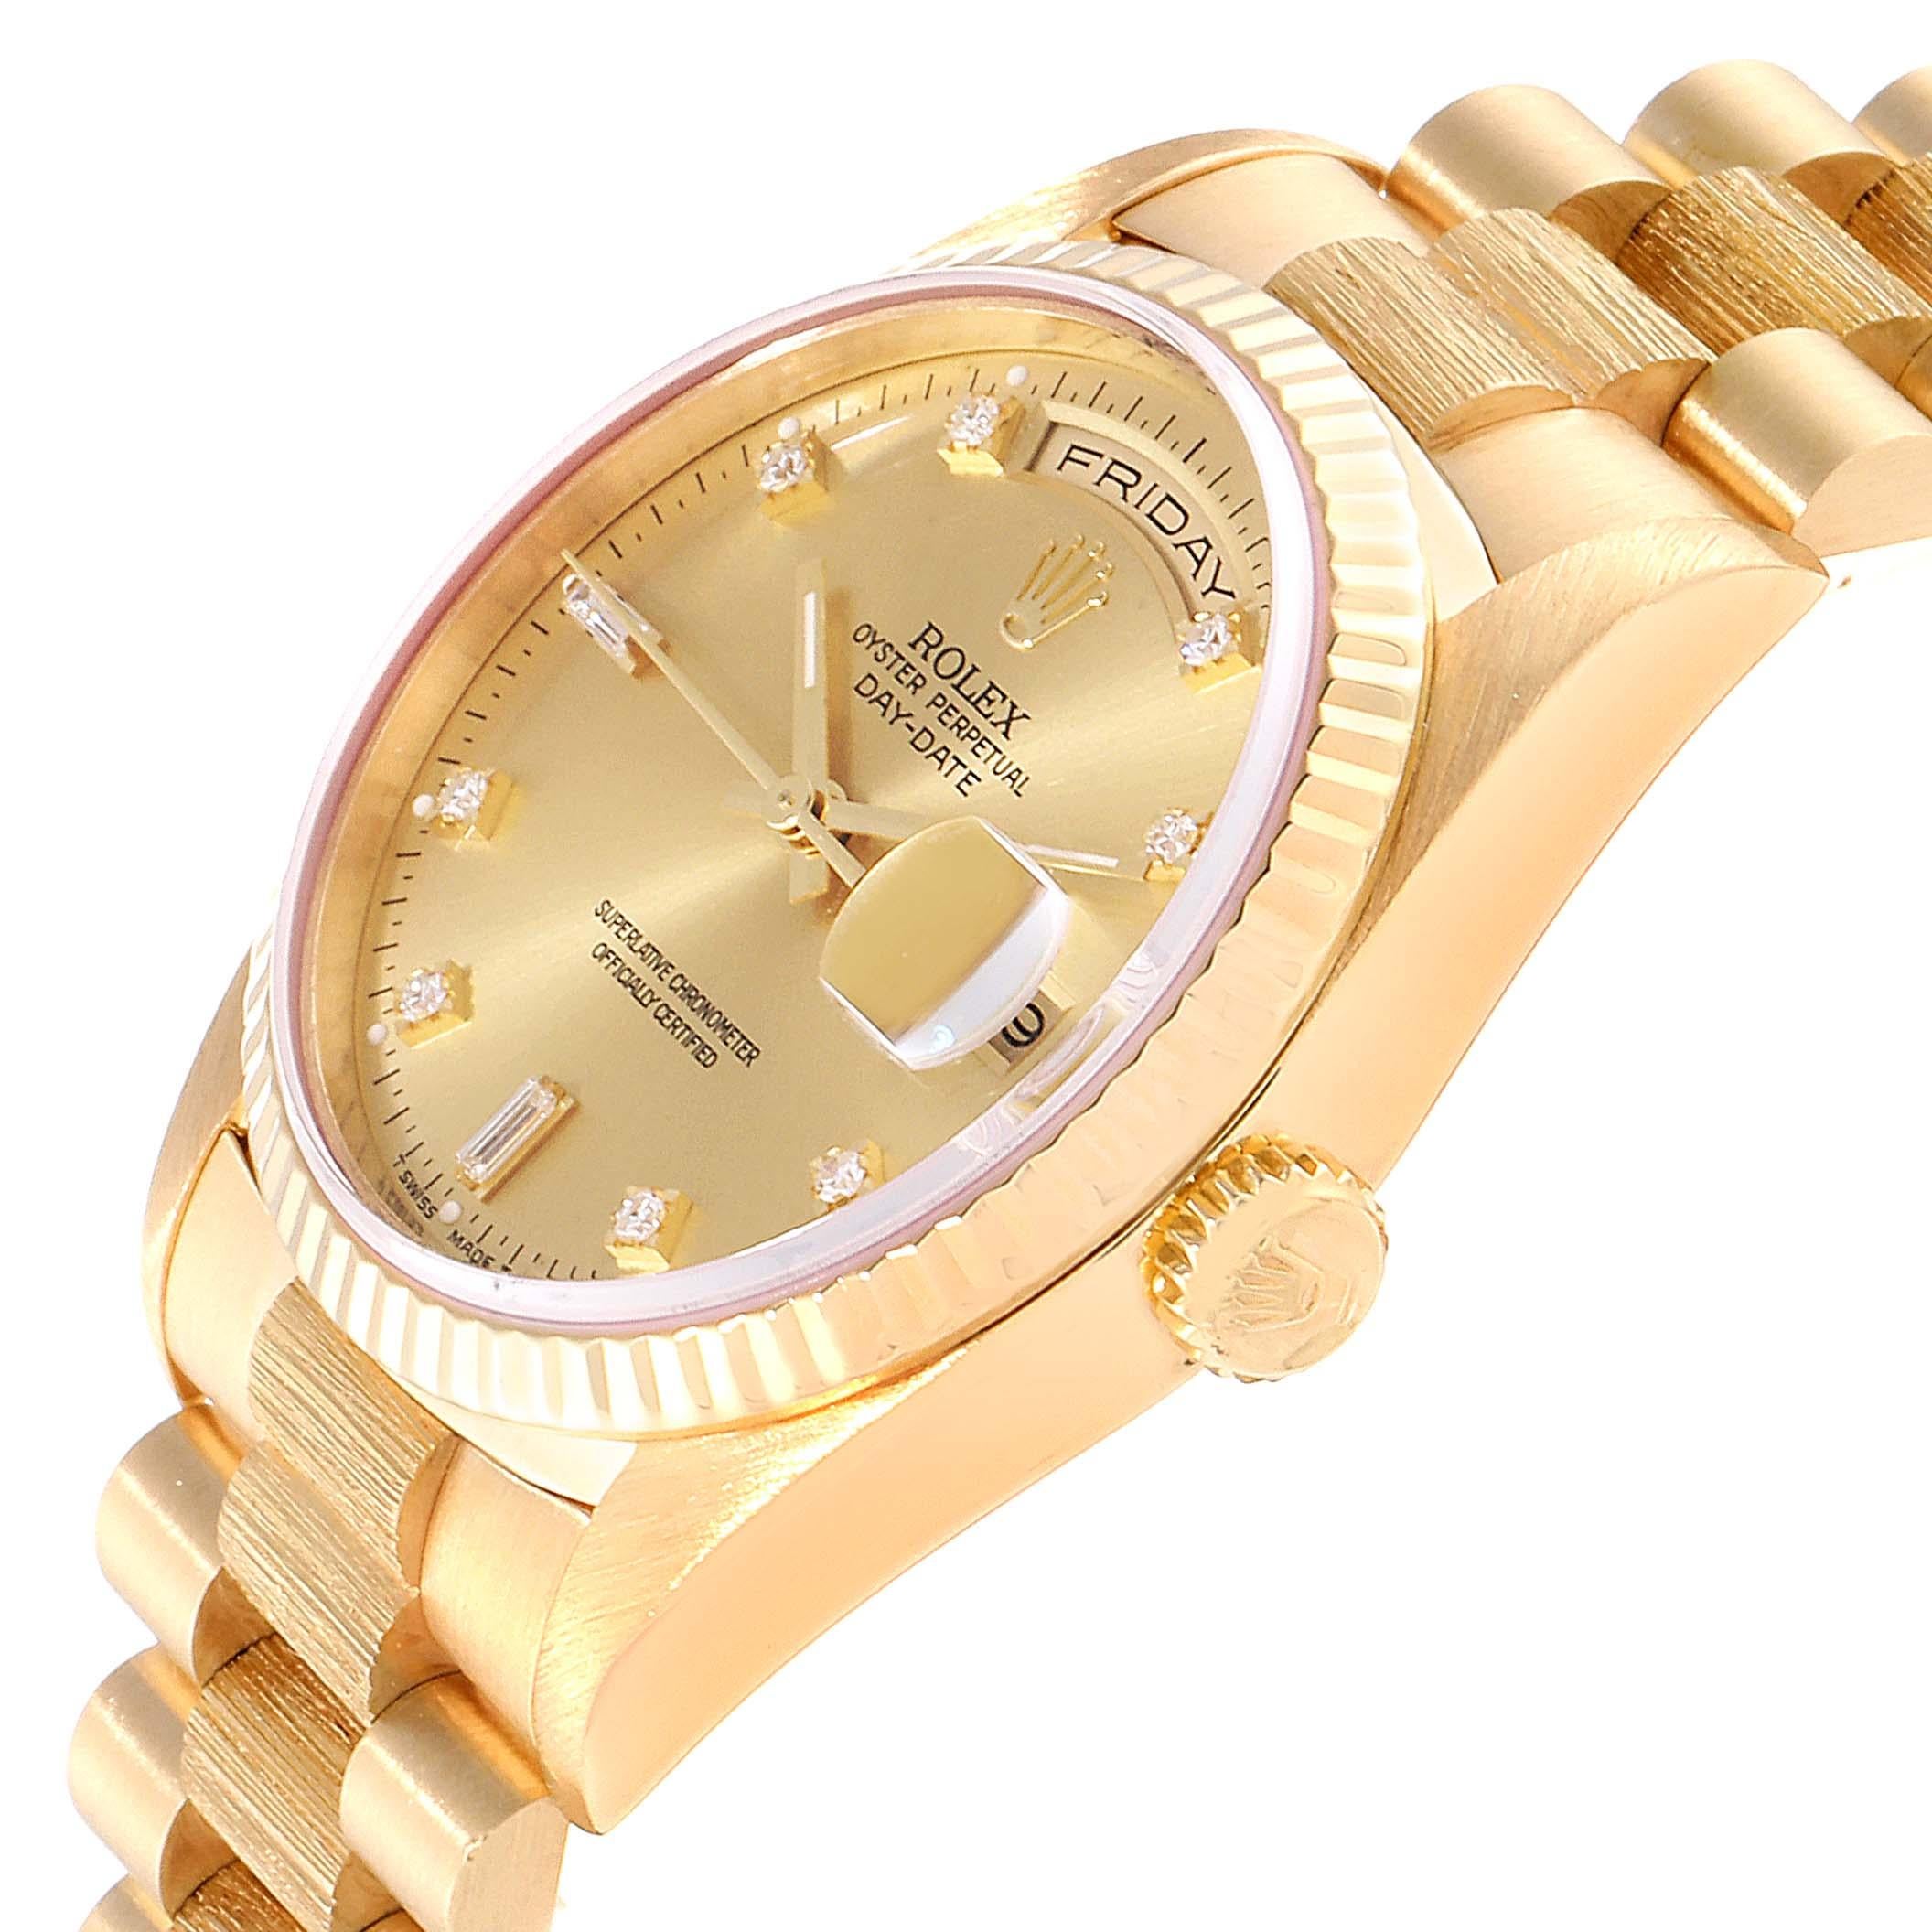 Rolex President Day-Date Yellow Gold Diamond Men's Watch 18238 For Sale 2